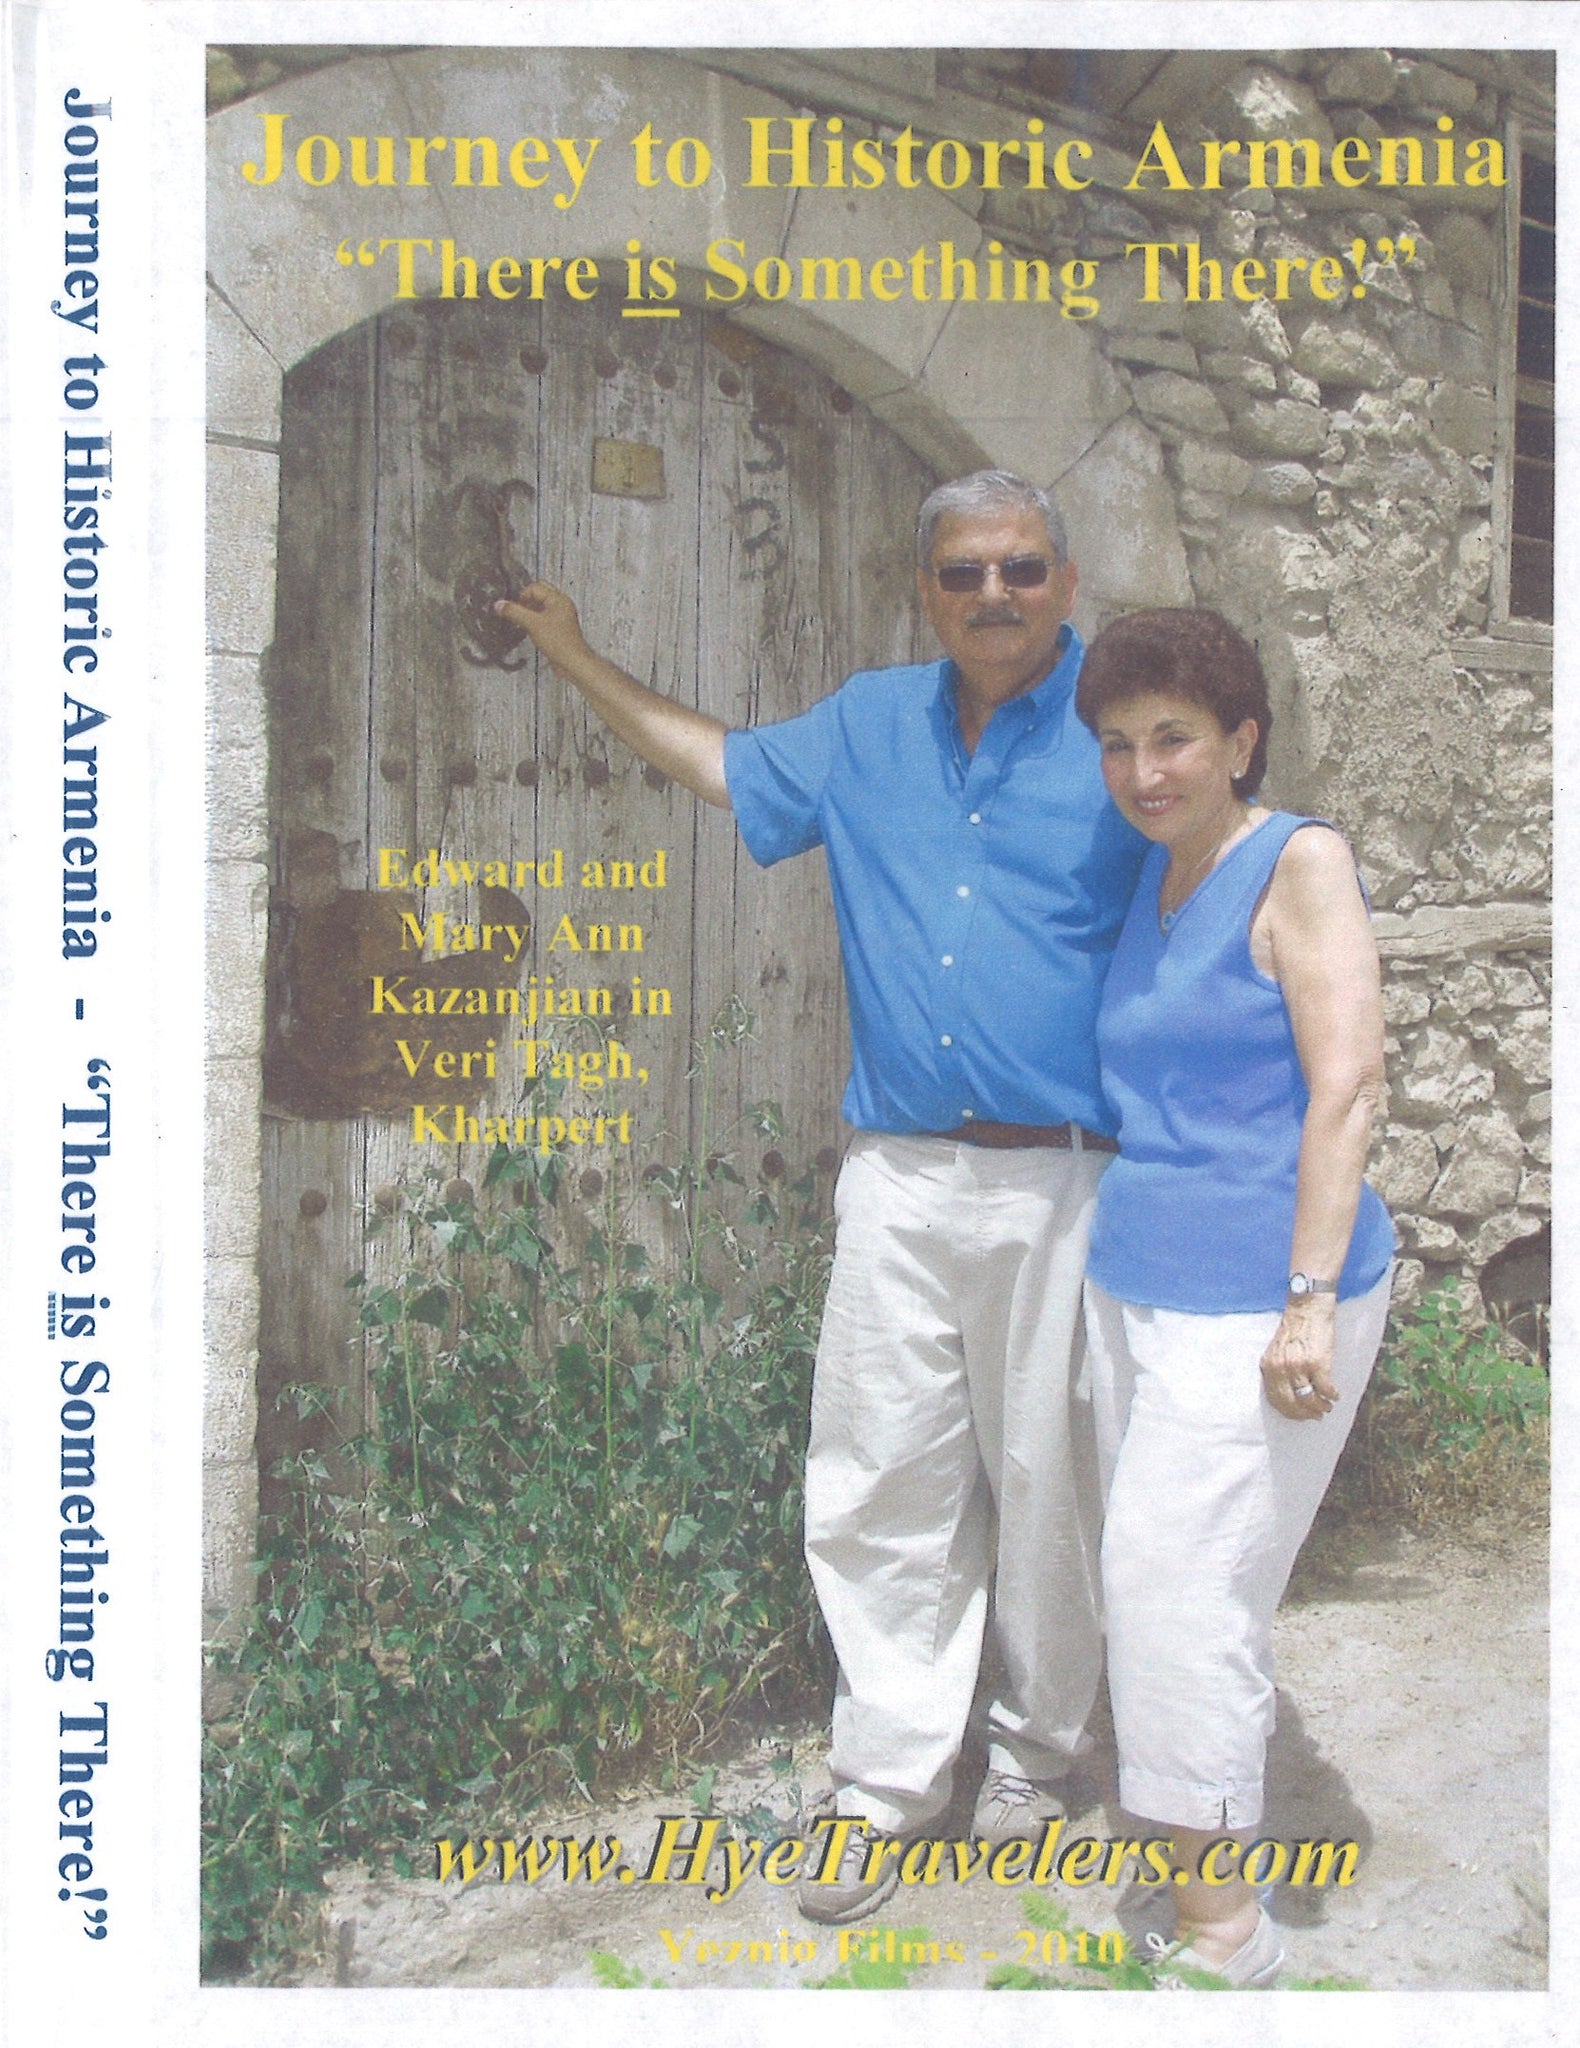 JOURNEY TO HISTORIC ARMENIA ~ "There is something there!"